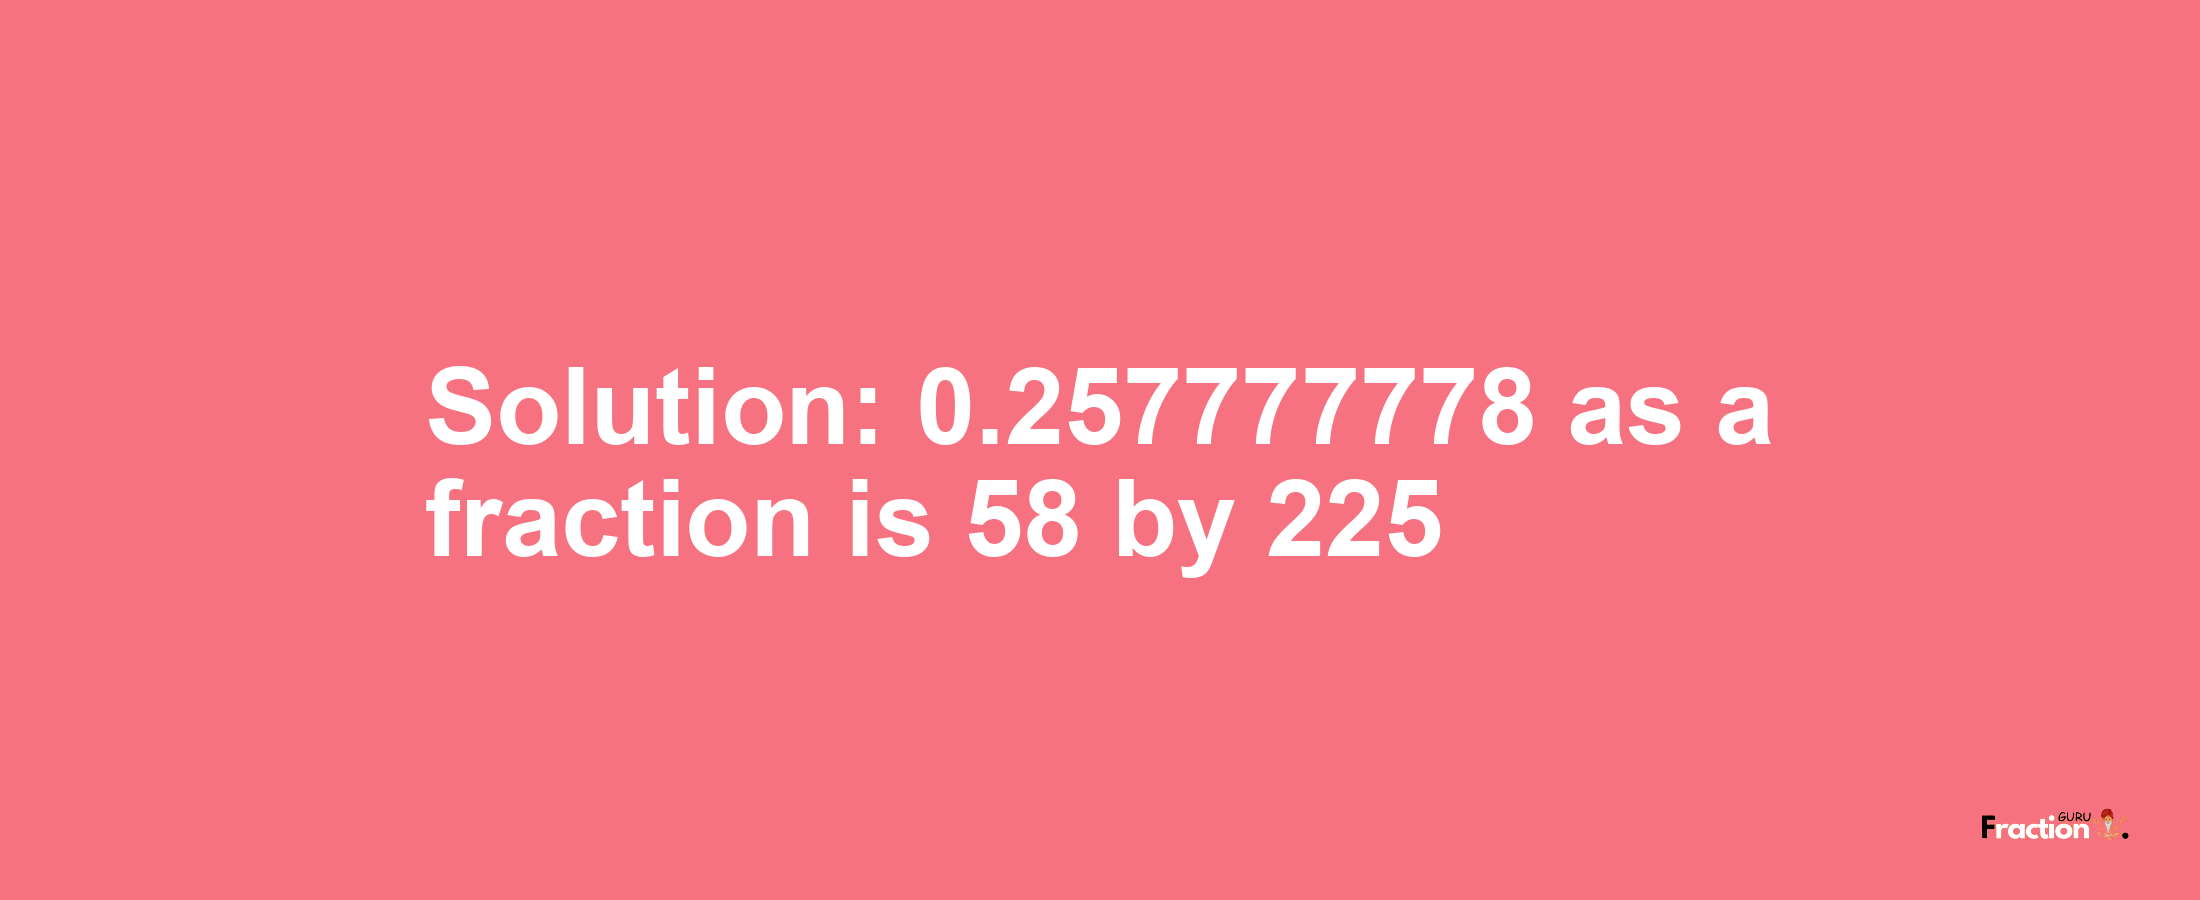 Solution:0.257777778 as a fraction is 58/225